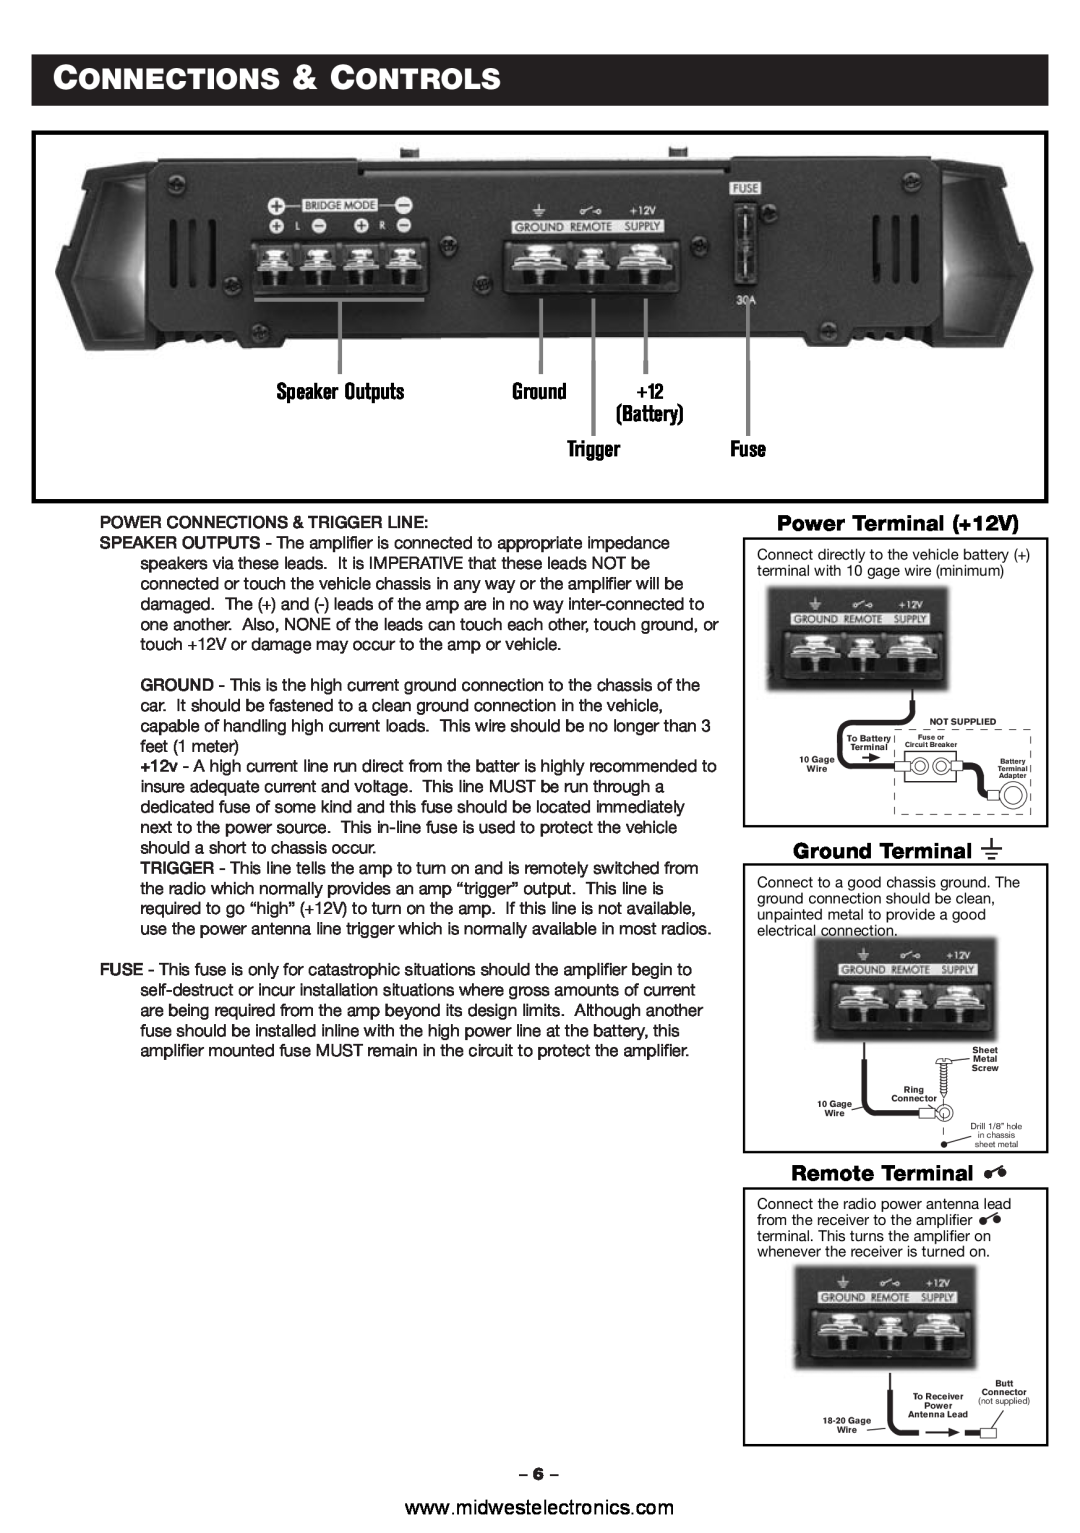 Blaupunkt PCA2120 Connections & Controls, Power Terminal +12V, Ground Terminal, Remote Terminal, Speaker Outputs, Fuse 